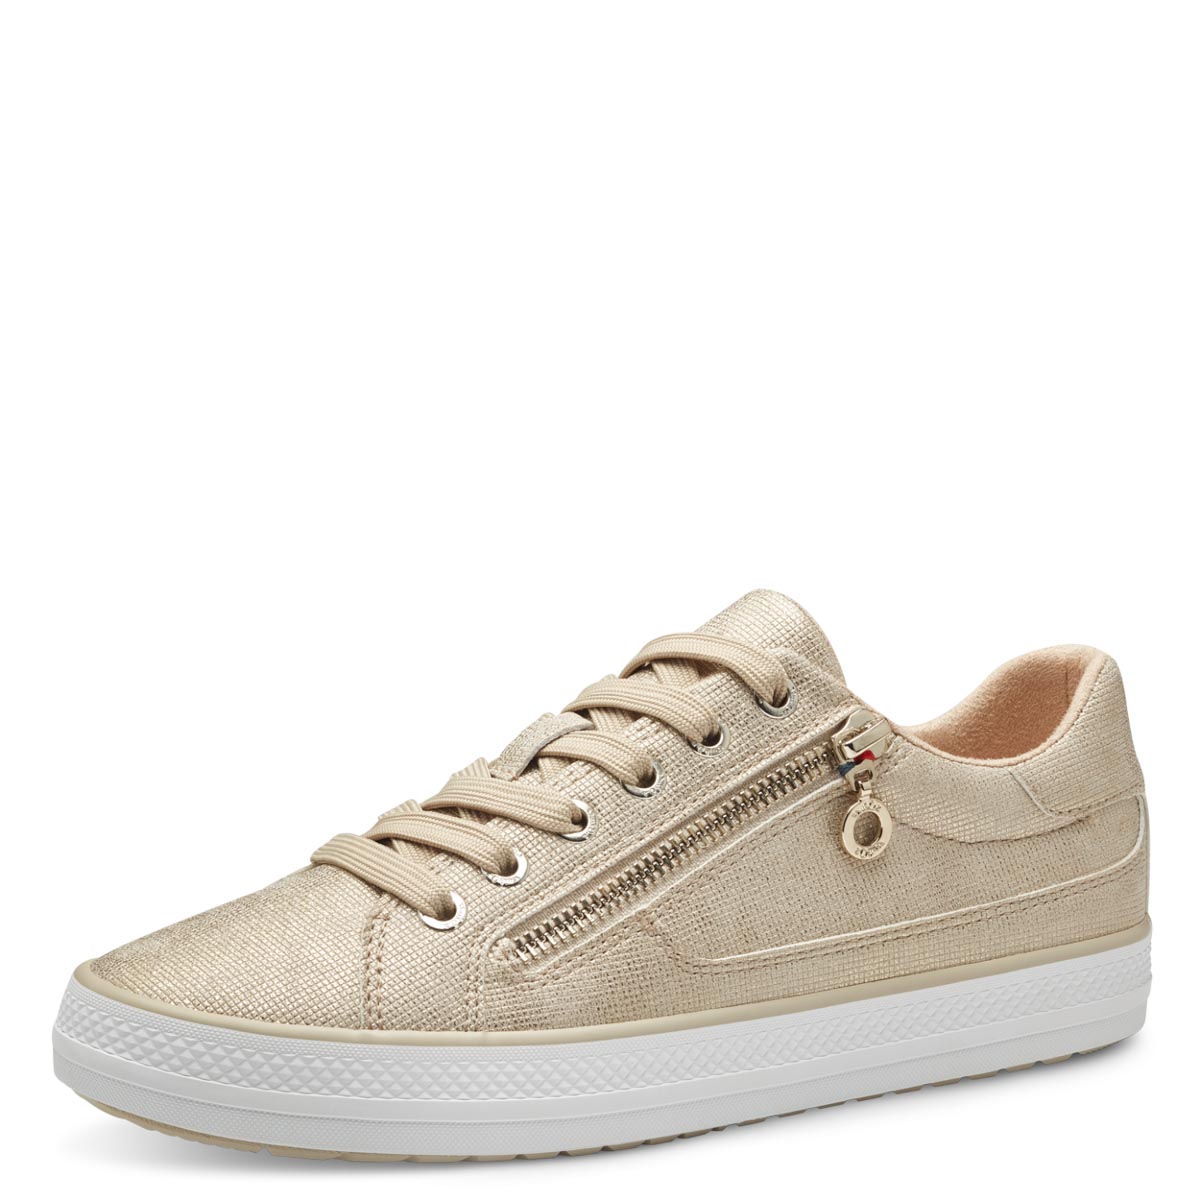 S.Oliver Gold-Taupe Runner Sneakers for Women - Elegant Style